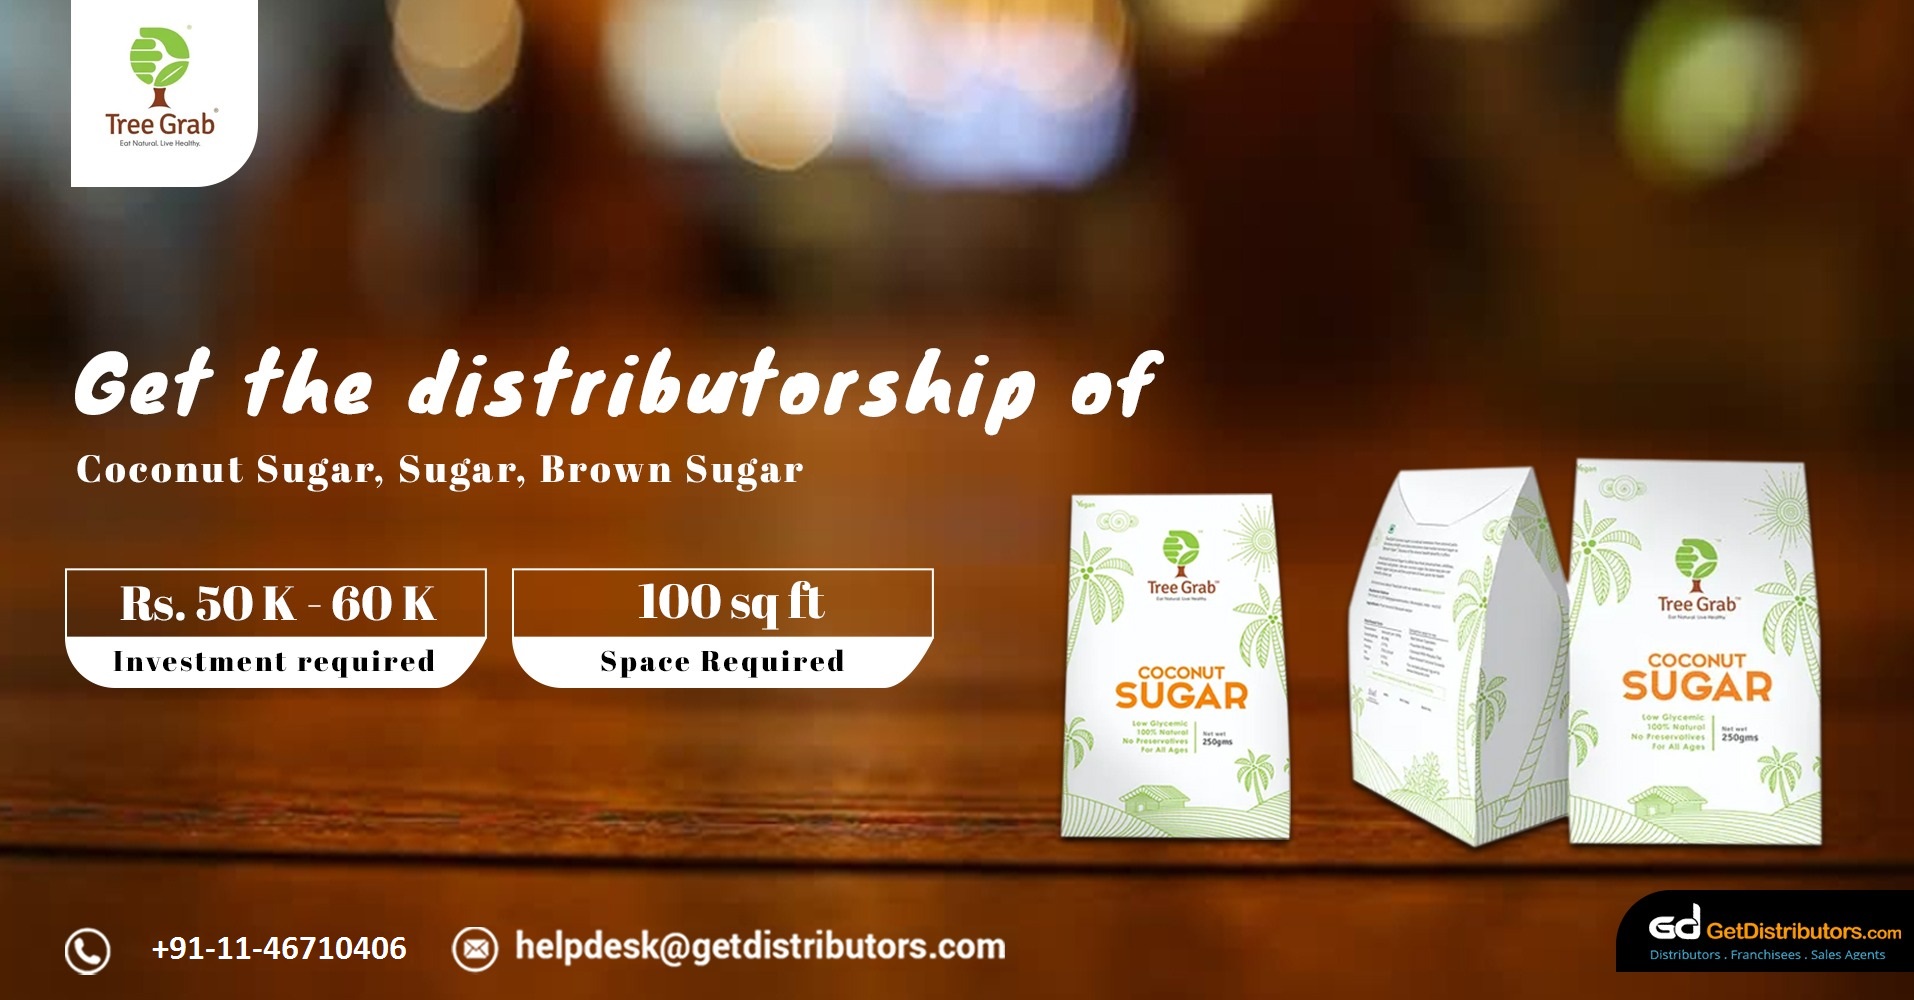 Premium coconut sugar and allied products at a reasonable price